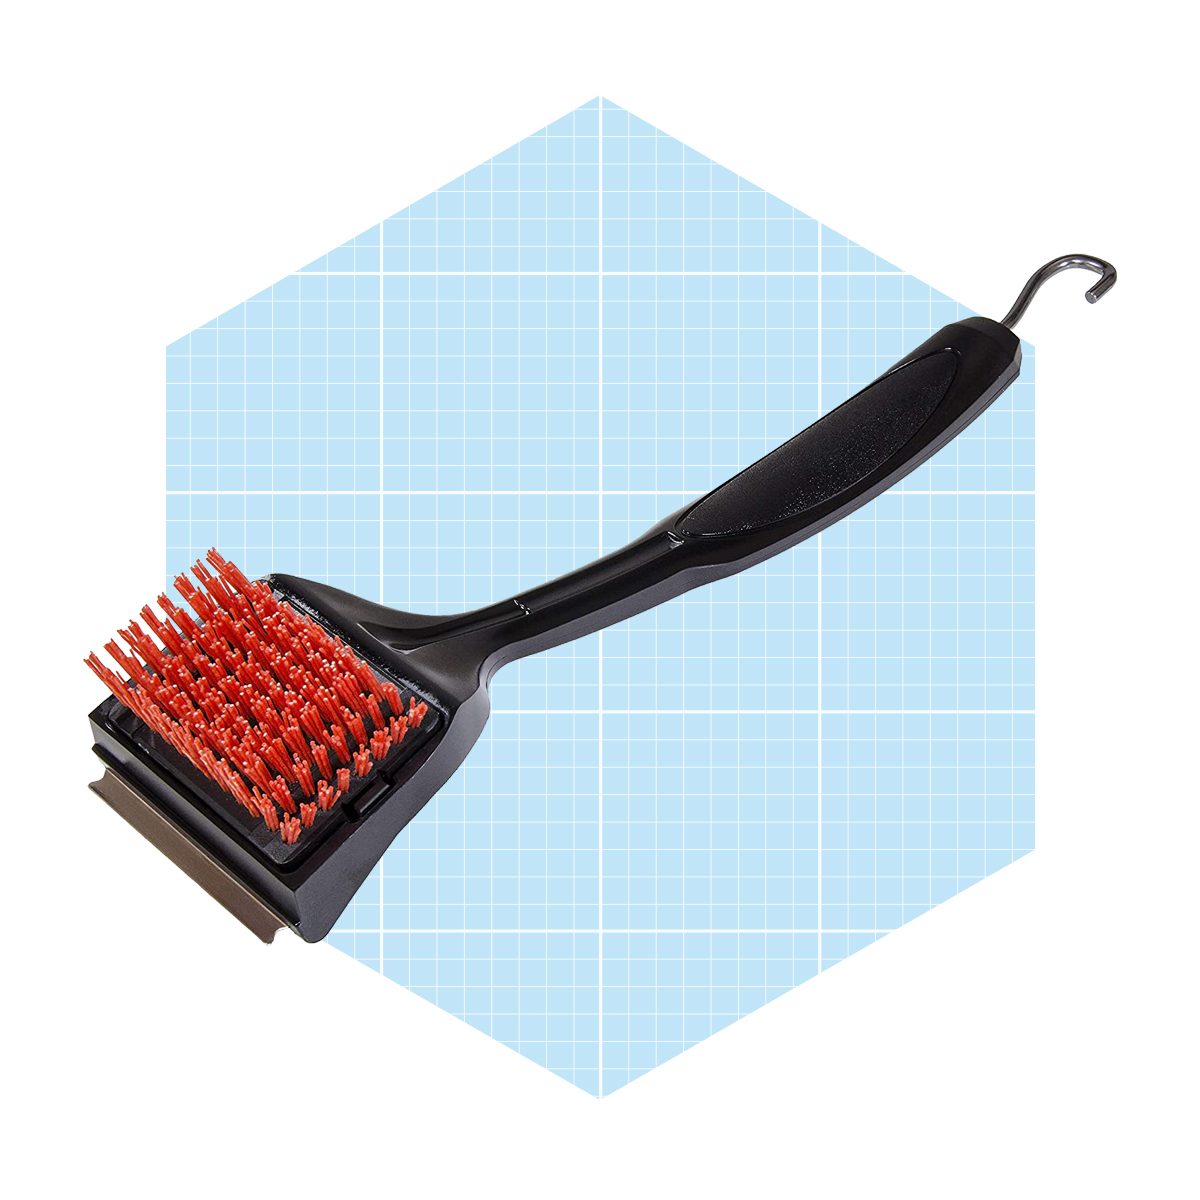 https://www.familyhandyman.com/wp-content/uploads/2020/06/Char-Broil-SAFER-Replaceable-Head-Nylon-Bristle-Grill-Brush-with-Cool-Clean-Technology-ecomm-amazon.com_.jpg?fit=700%2C700